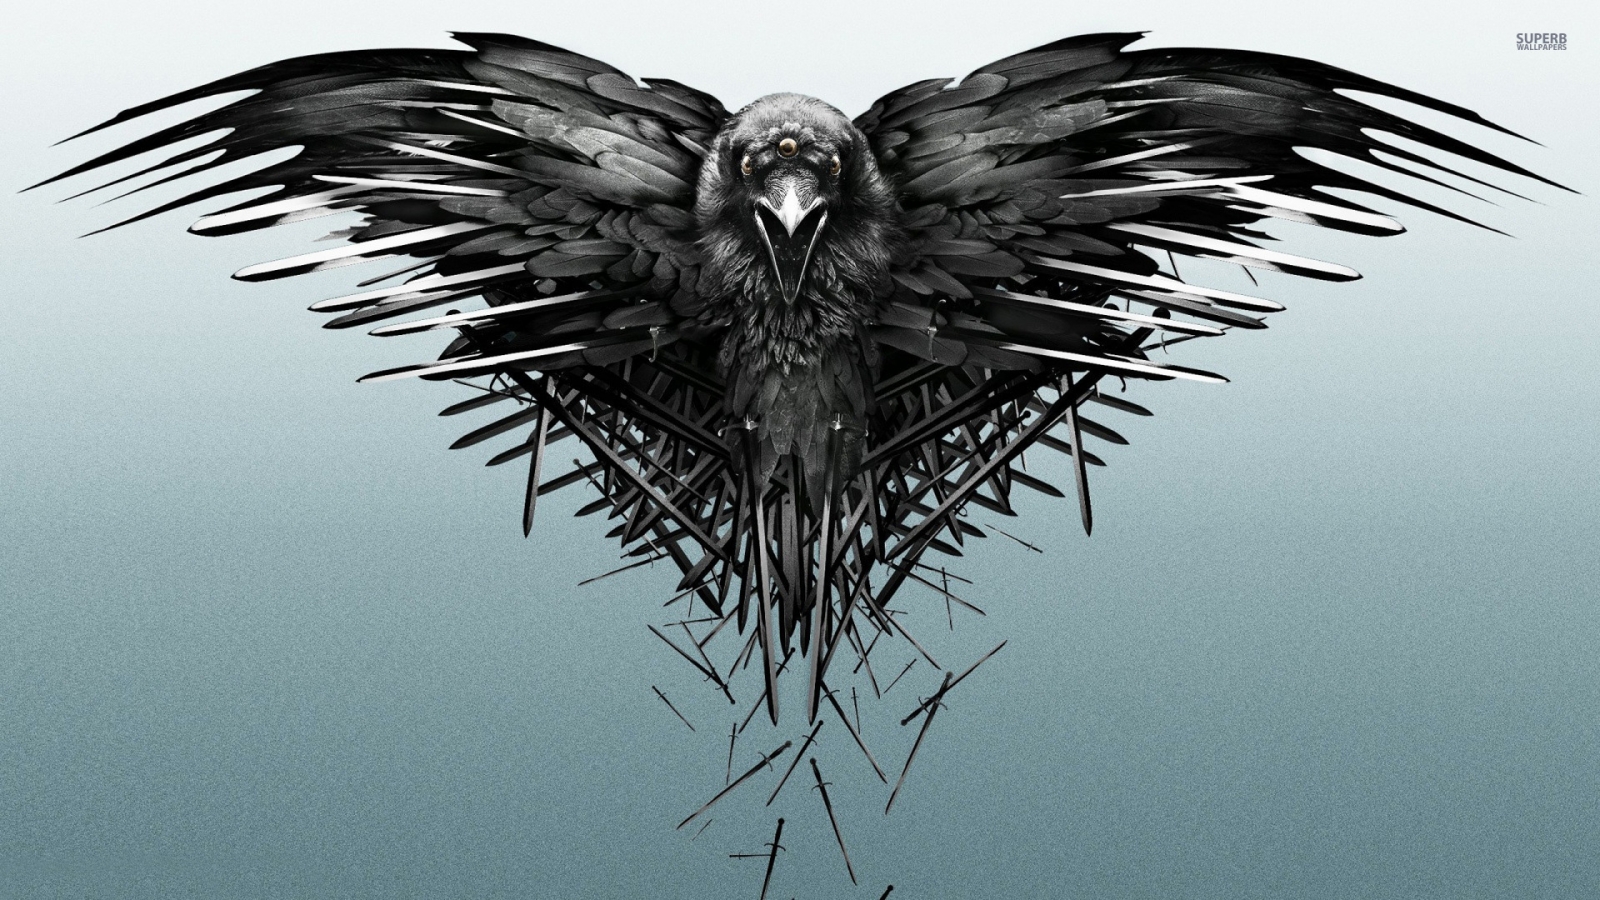 The three eyed raven game Of thrones 31615 1920x1080